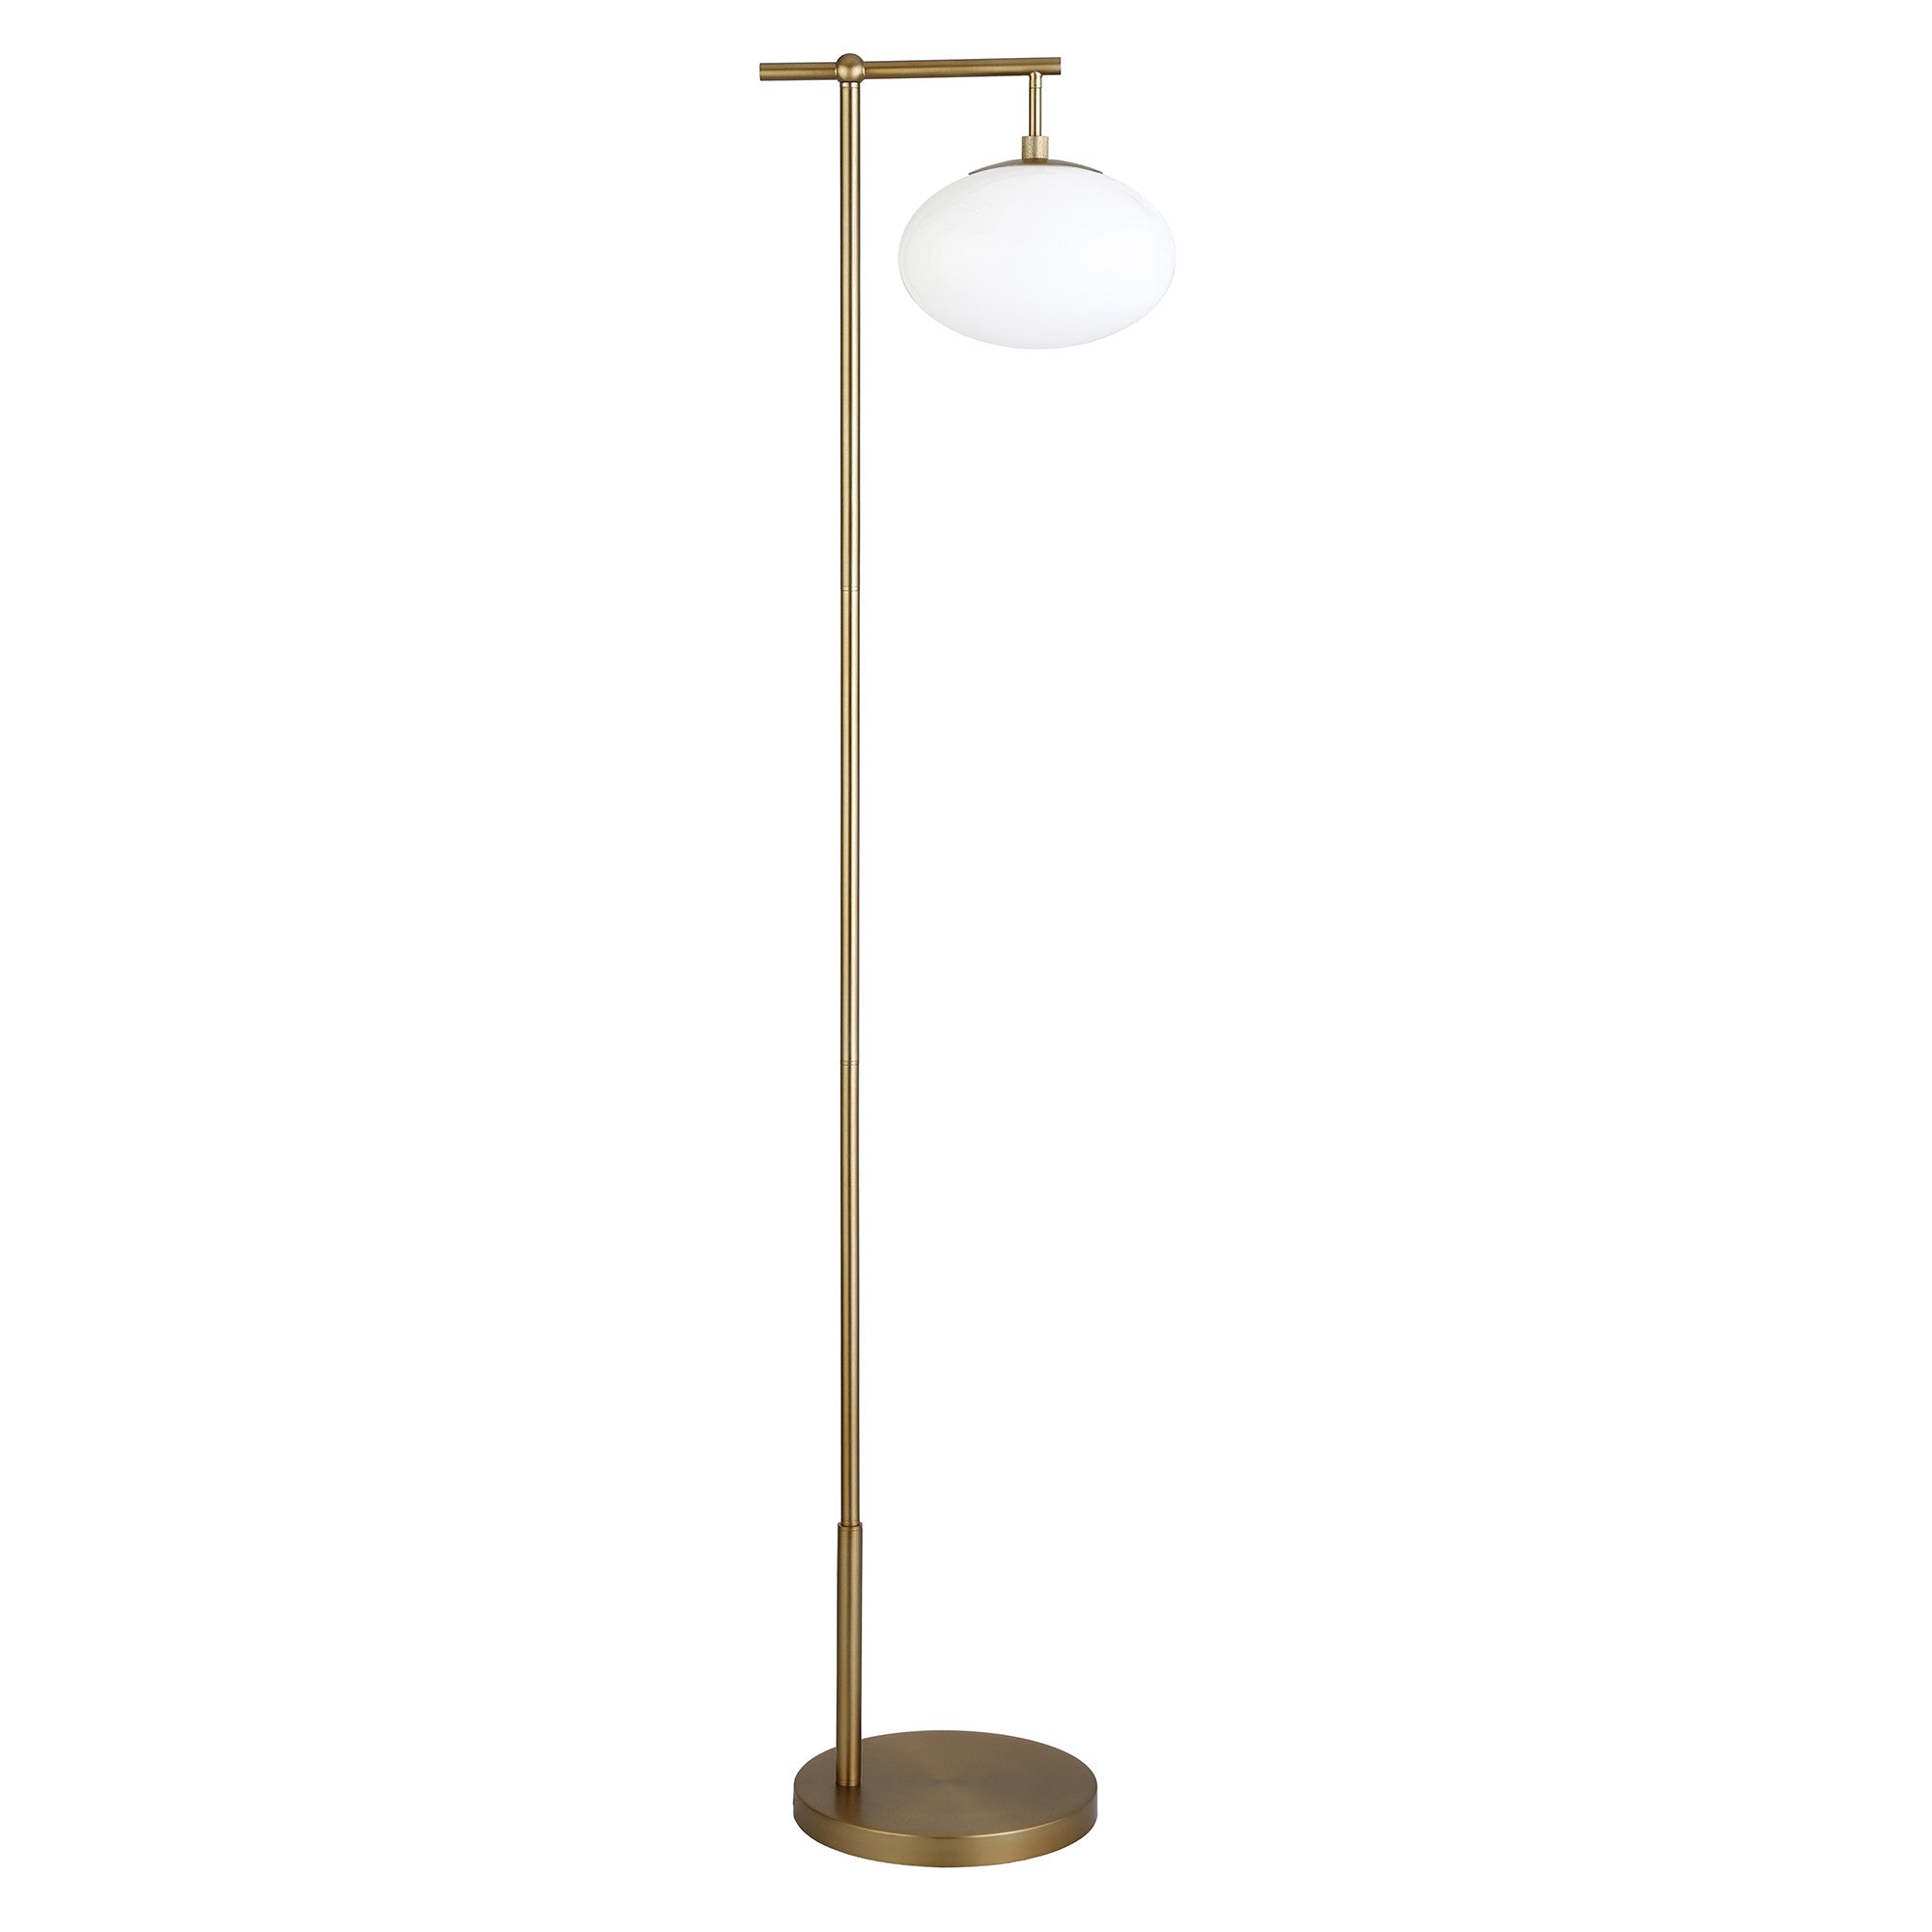 68" Brass Reading Floor Lamp With White Frosted Glass Globe Shade